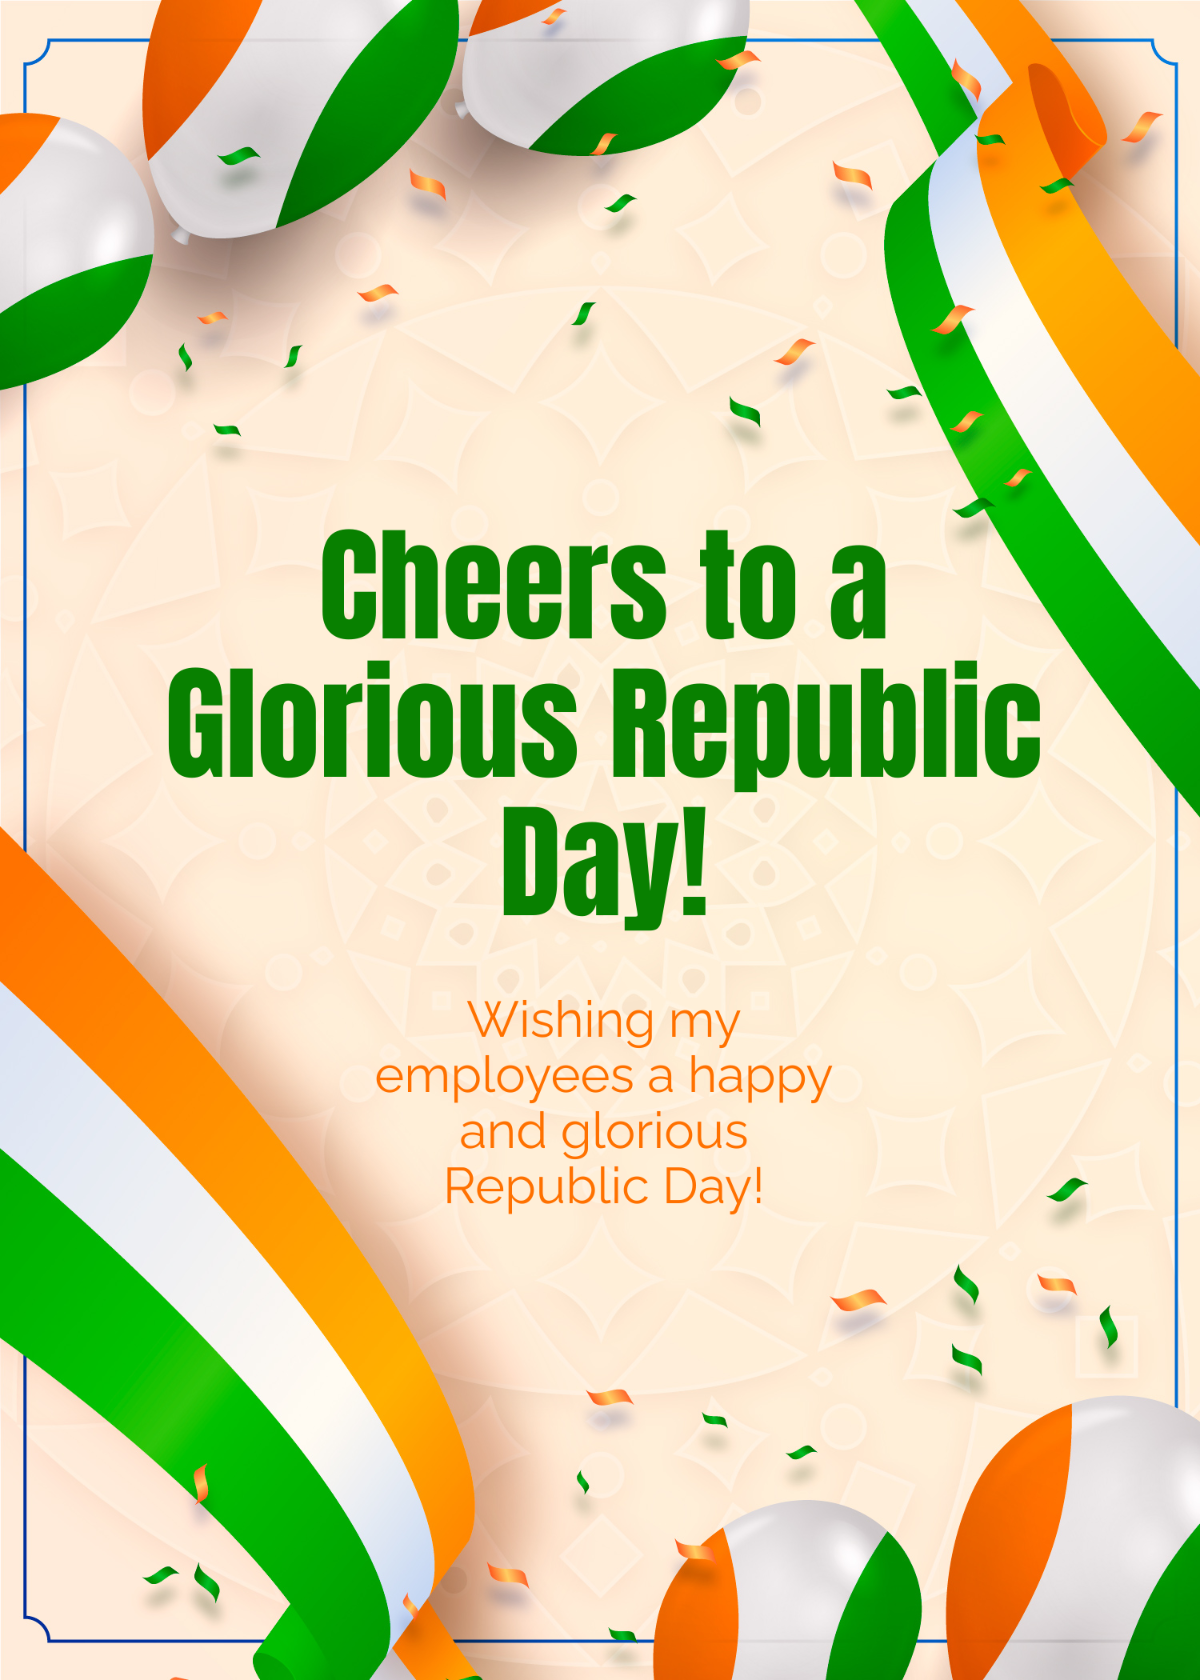 Corporate Republic Day Wishes